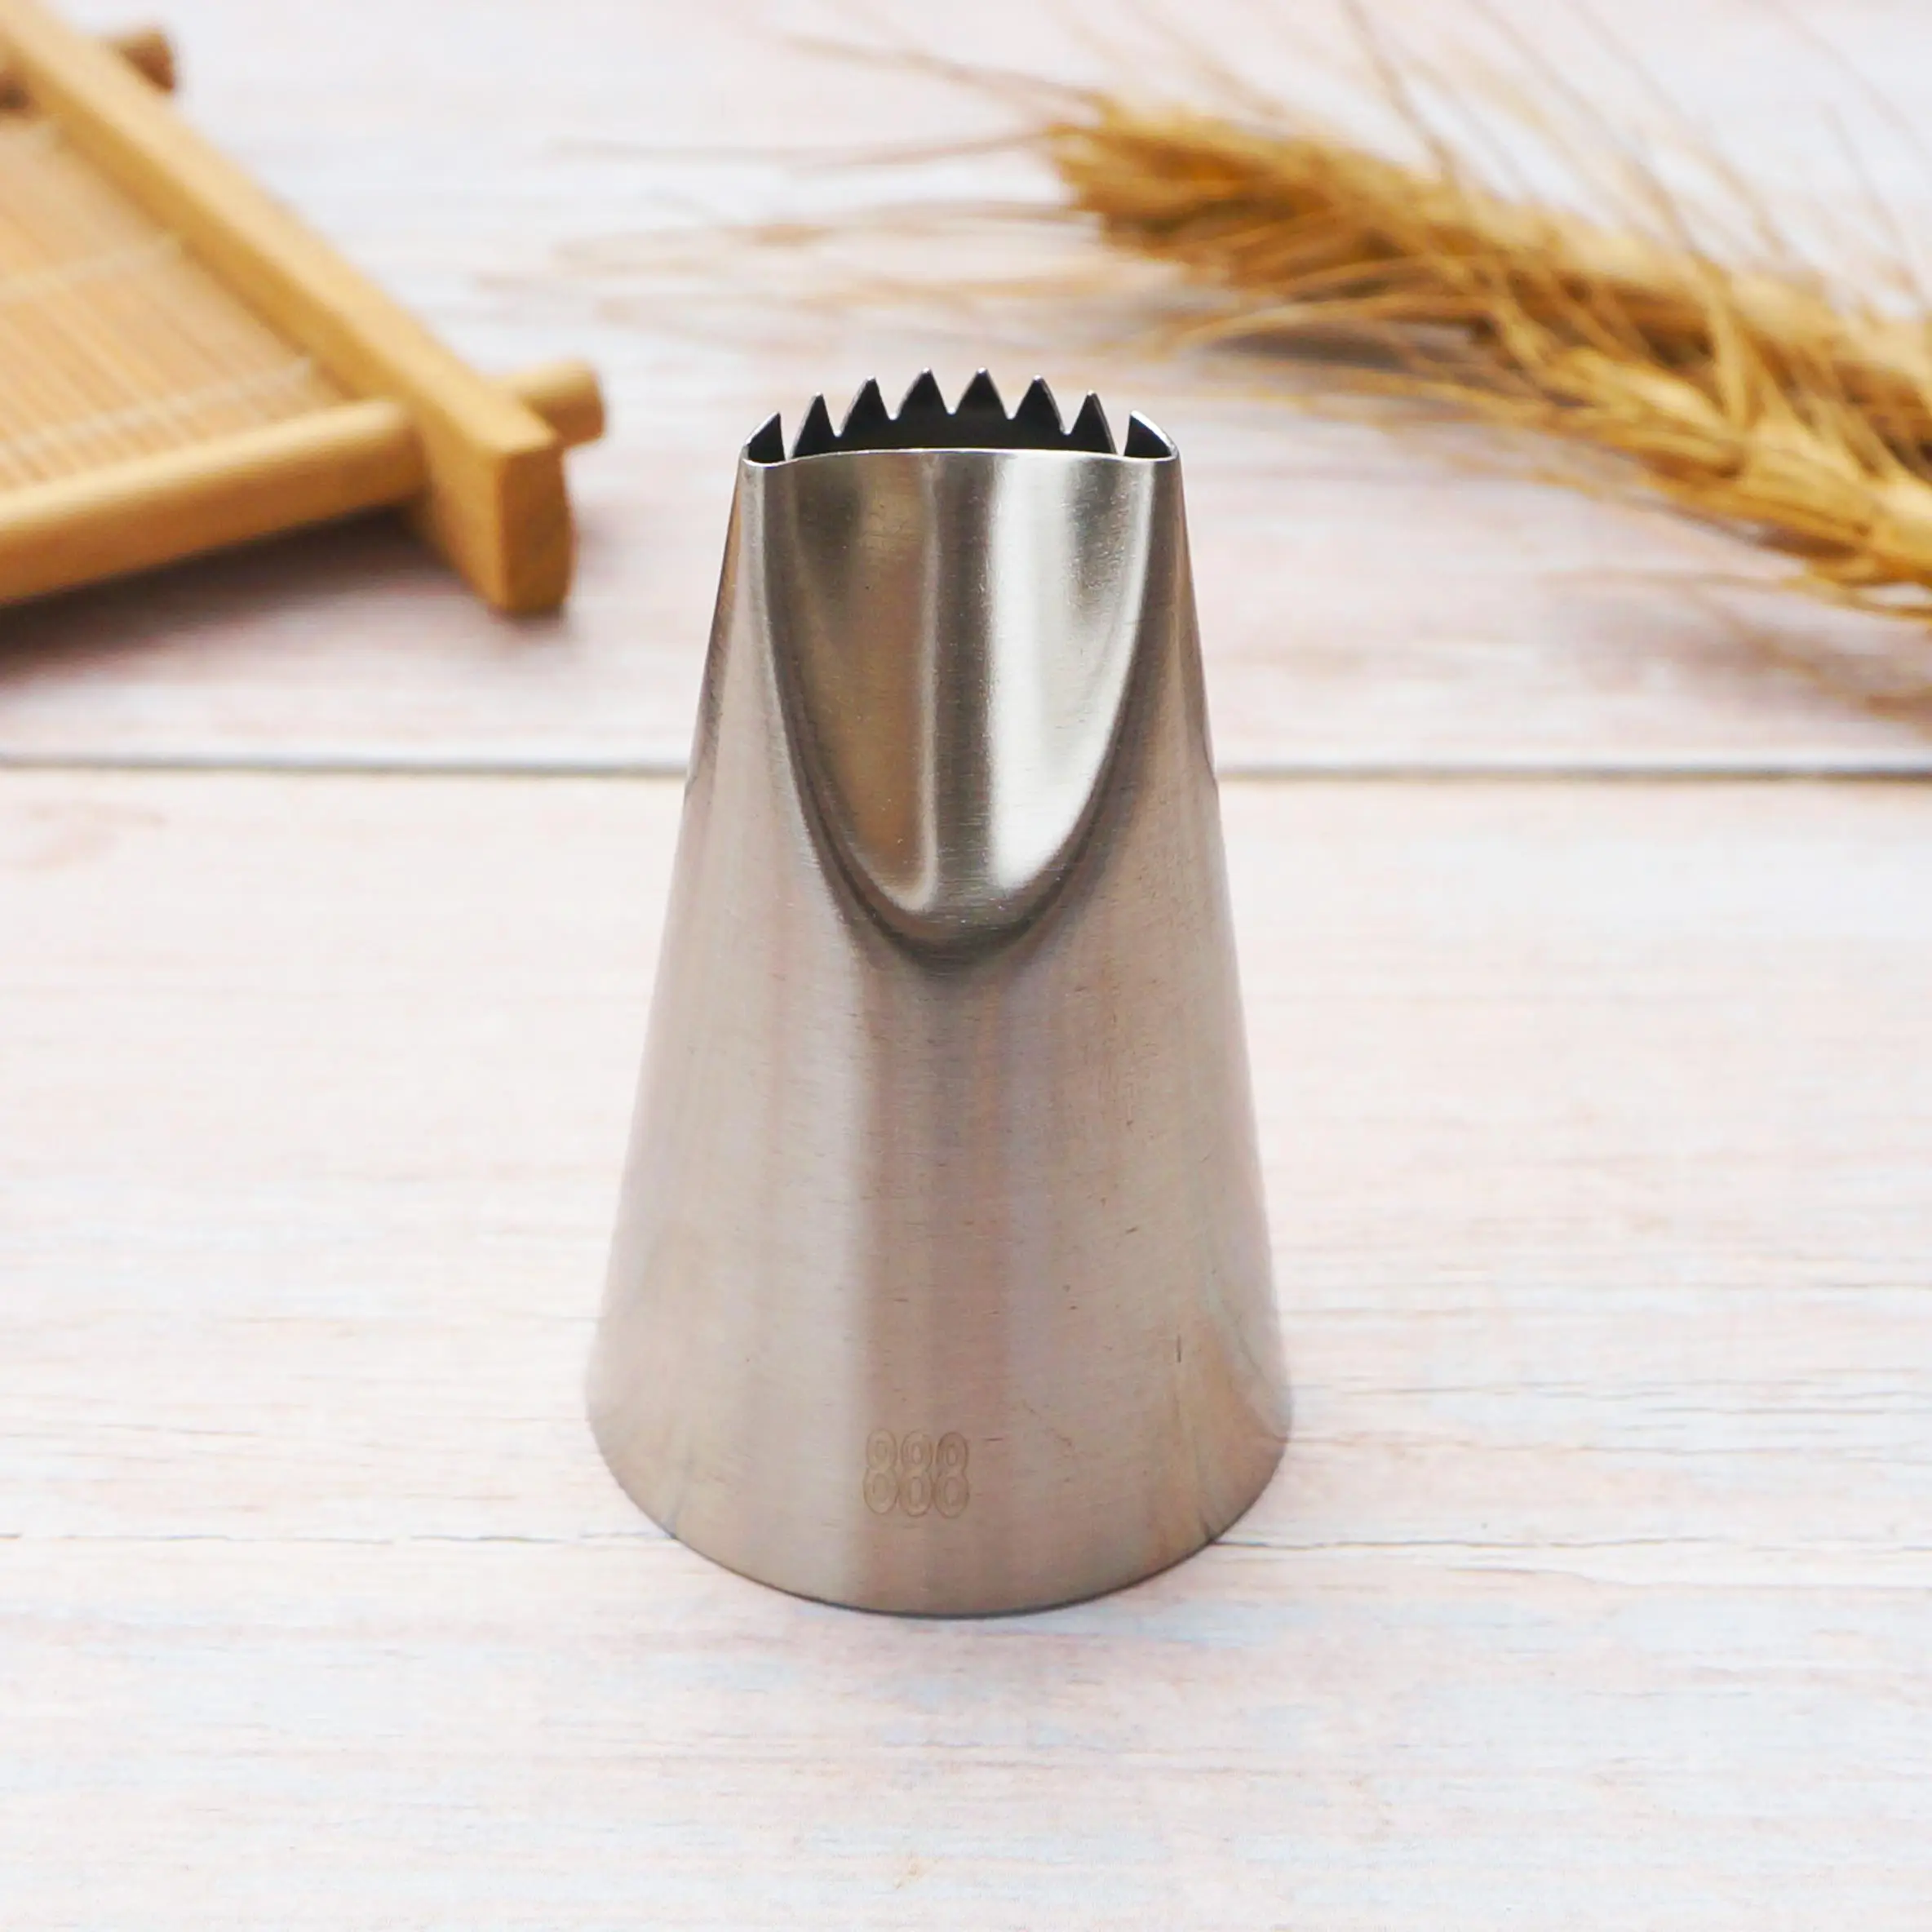 JEM BASKETWEAVE Stainless Steel Icing Piping Cup Cake Decorating Nozzle Tip Tube 